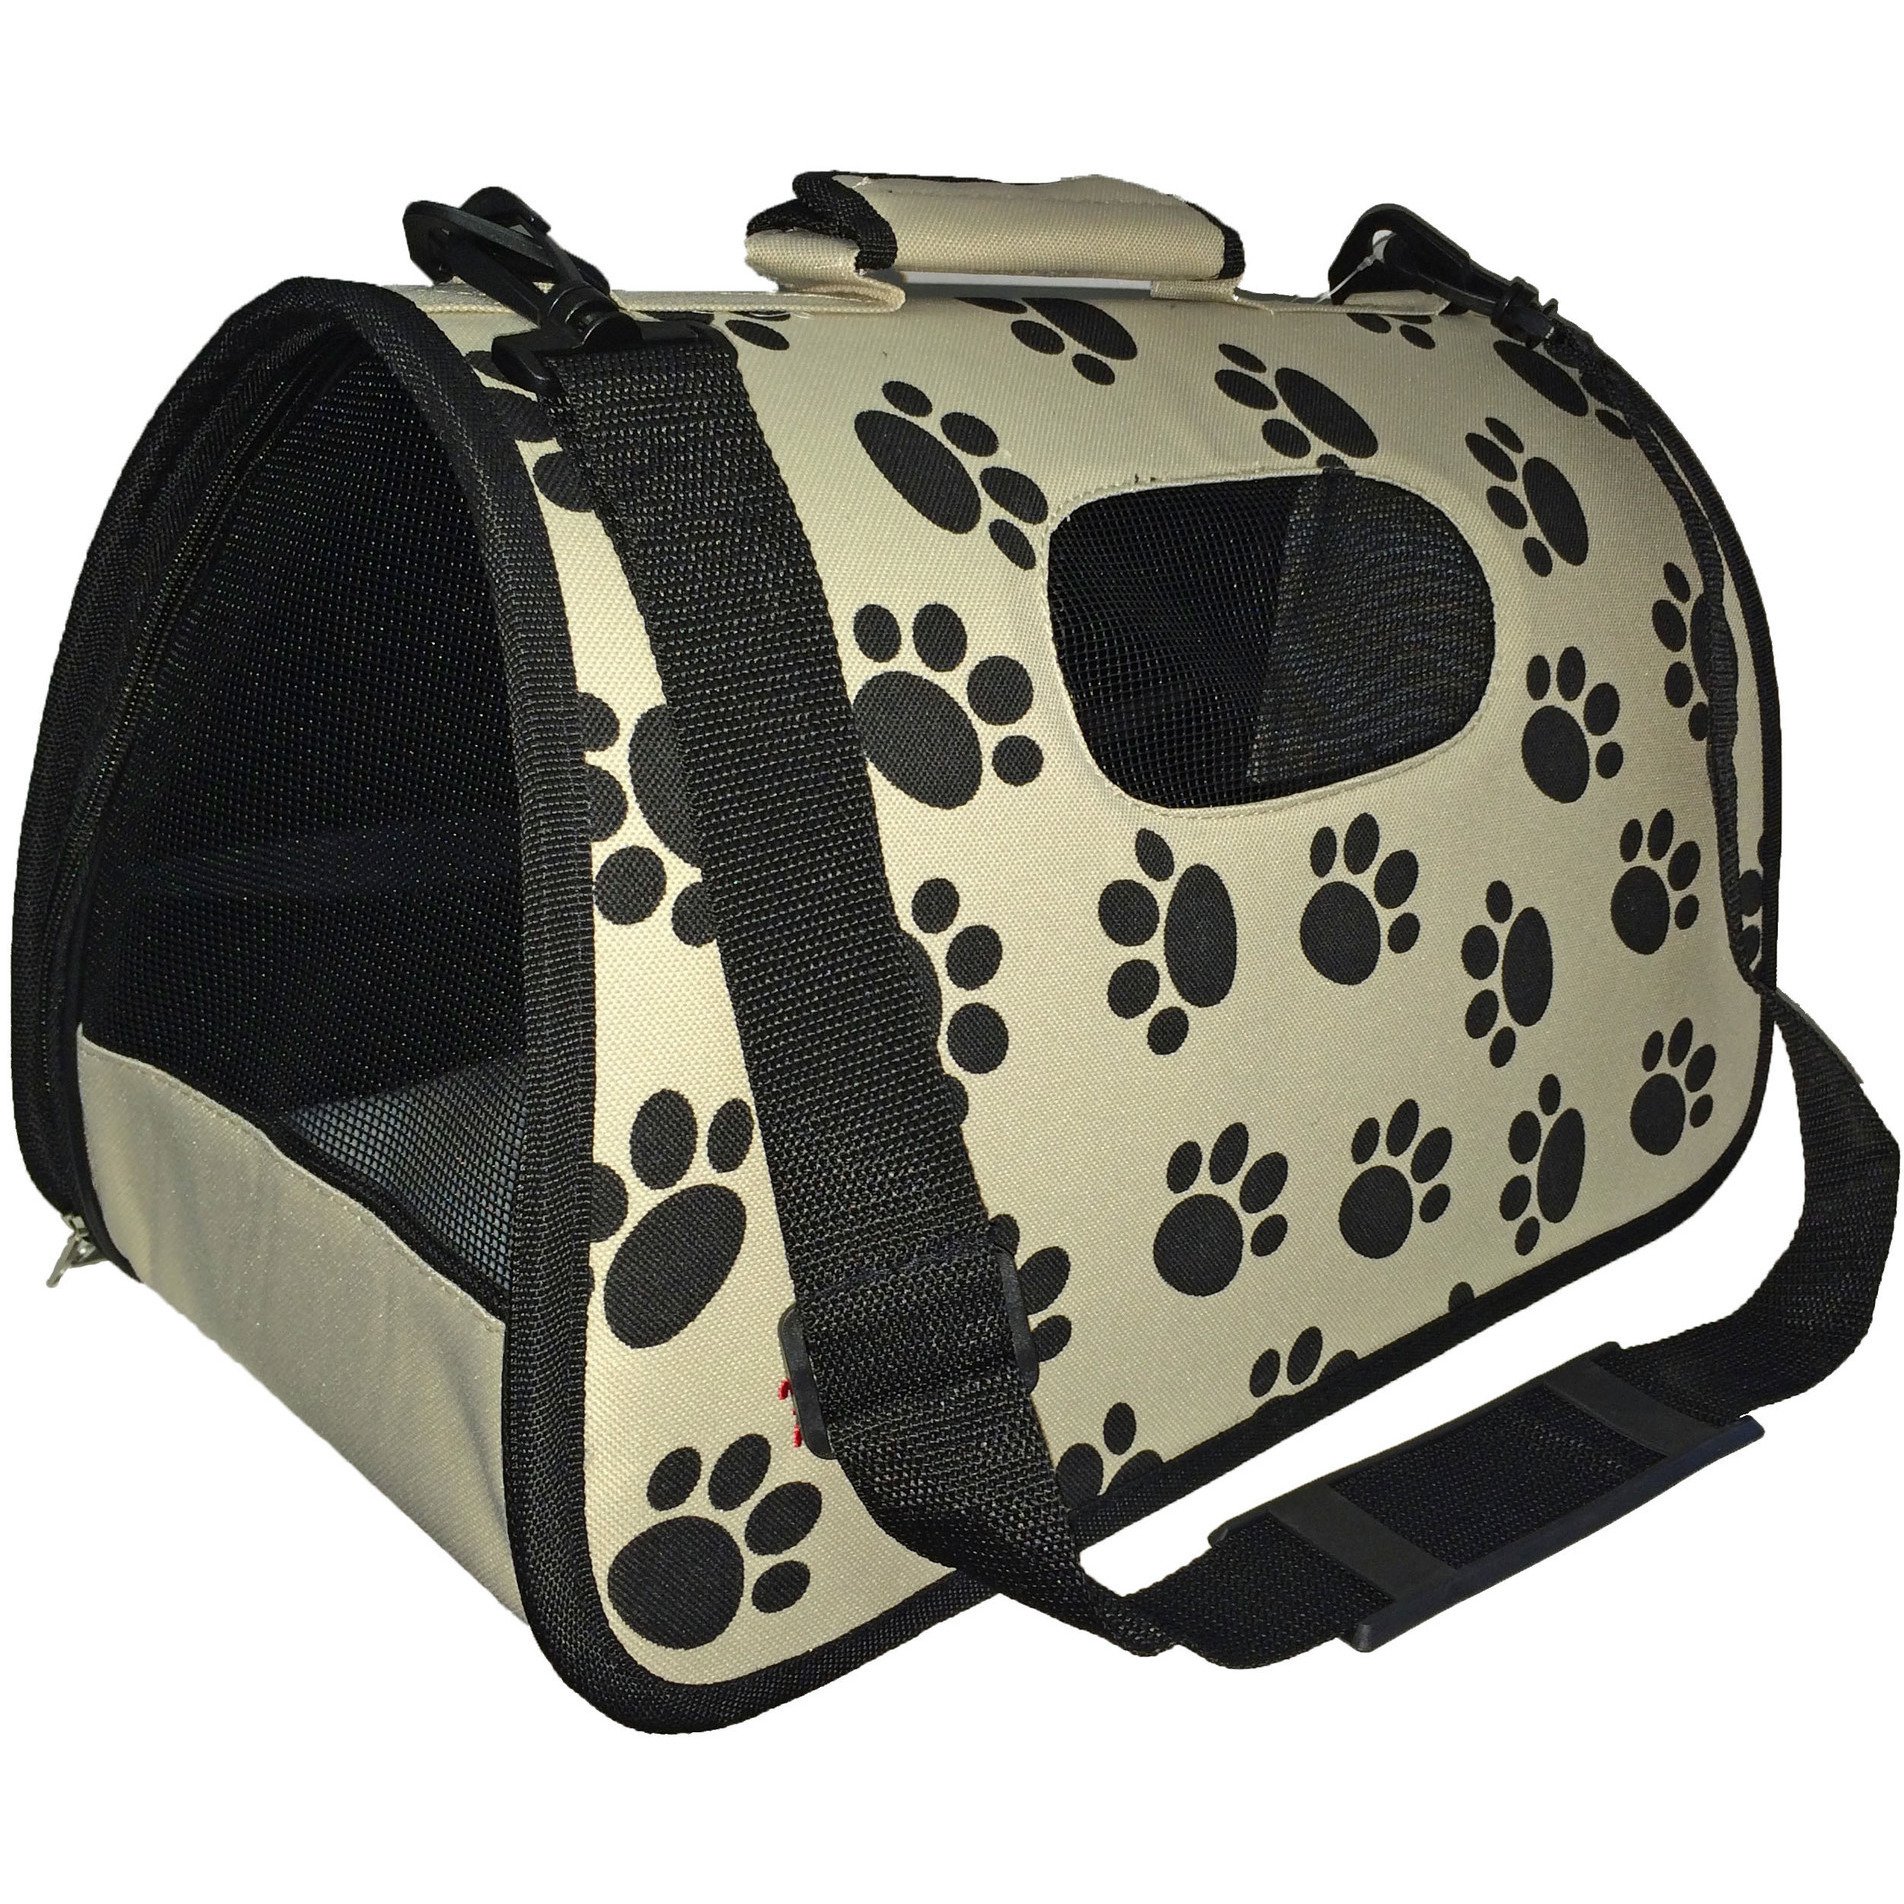 Airline Approved Folding Zippered Sporty Cage Pet Carrier - Paw Print